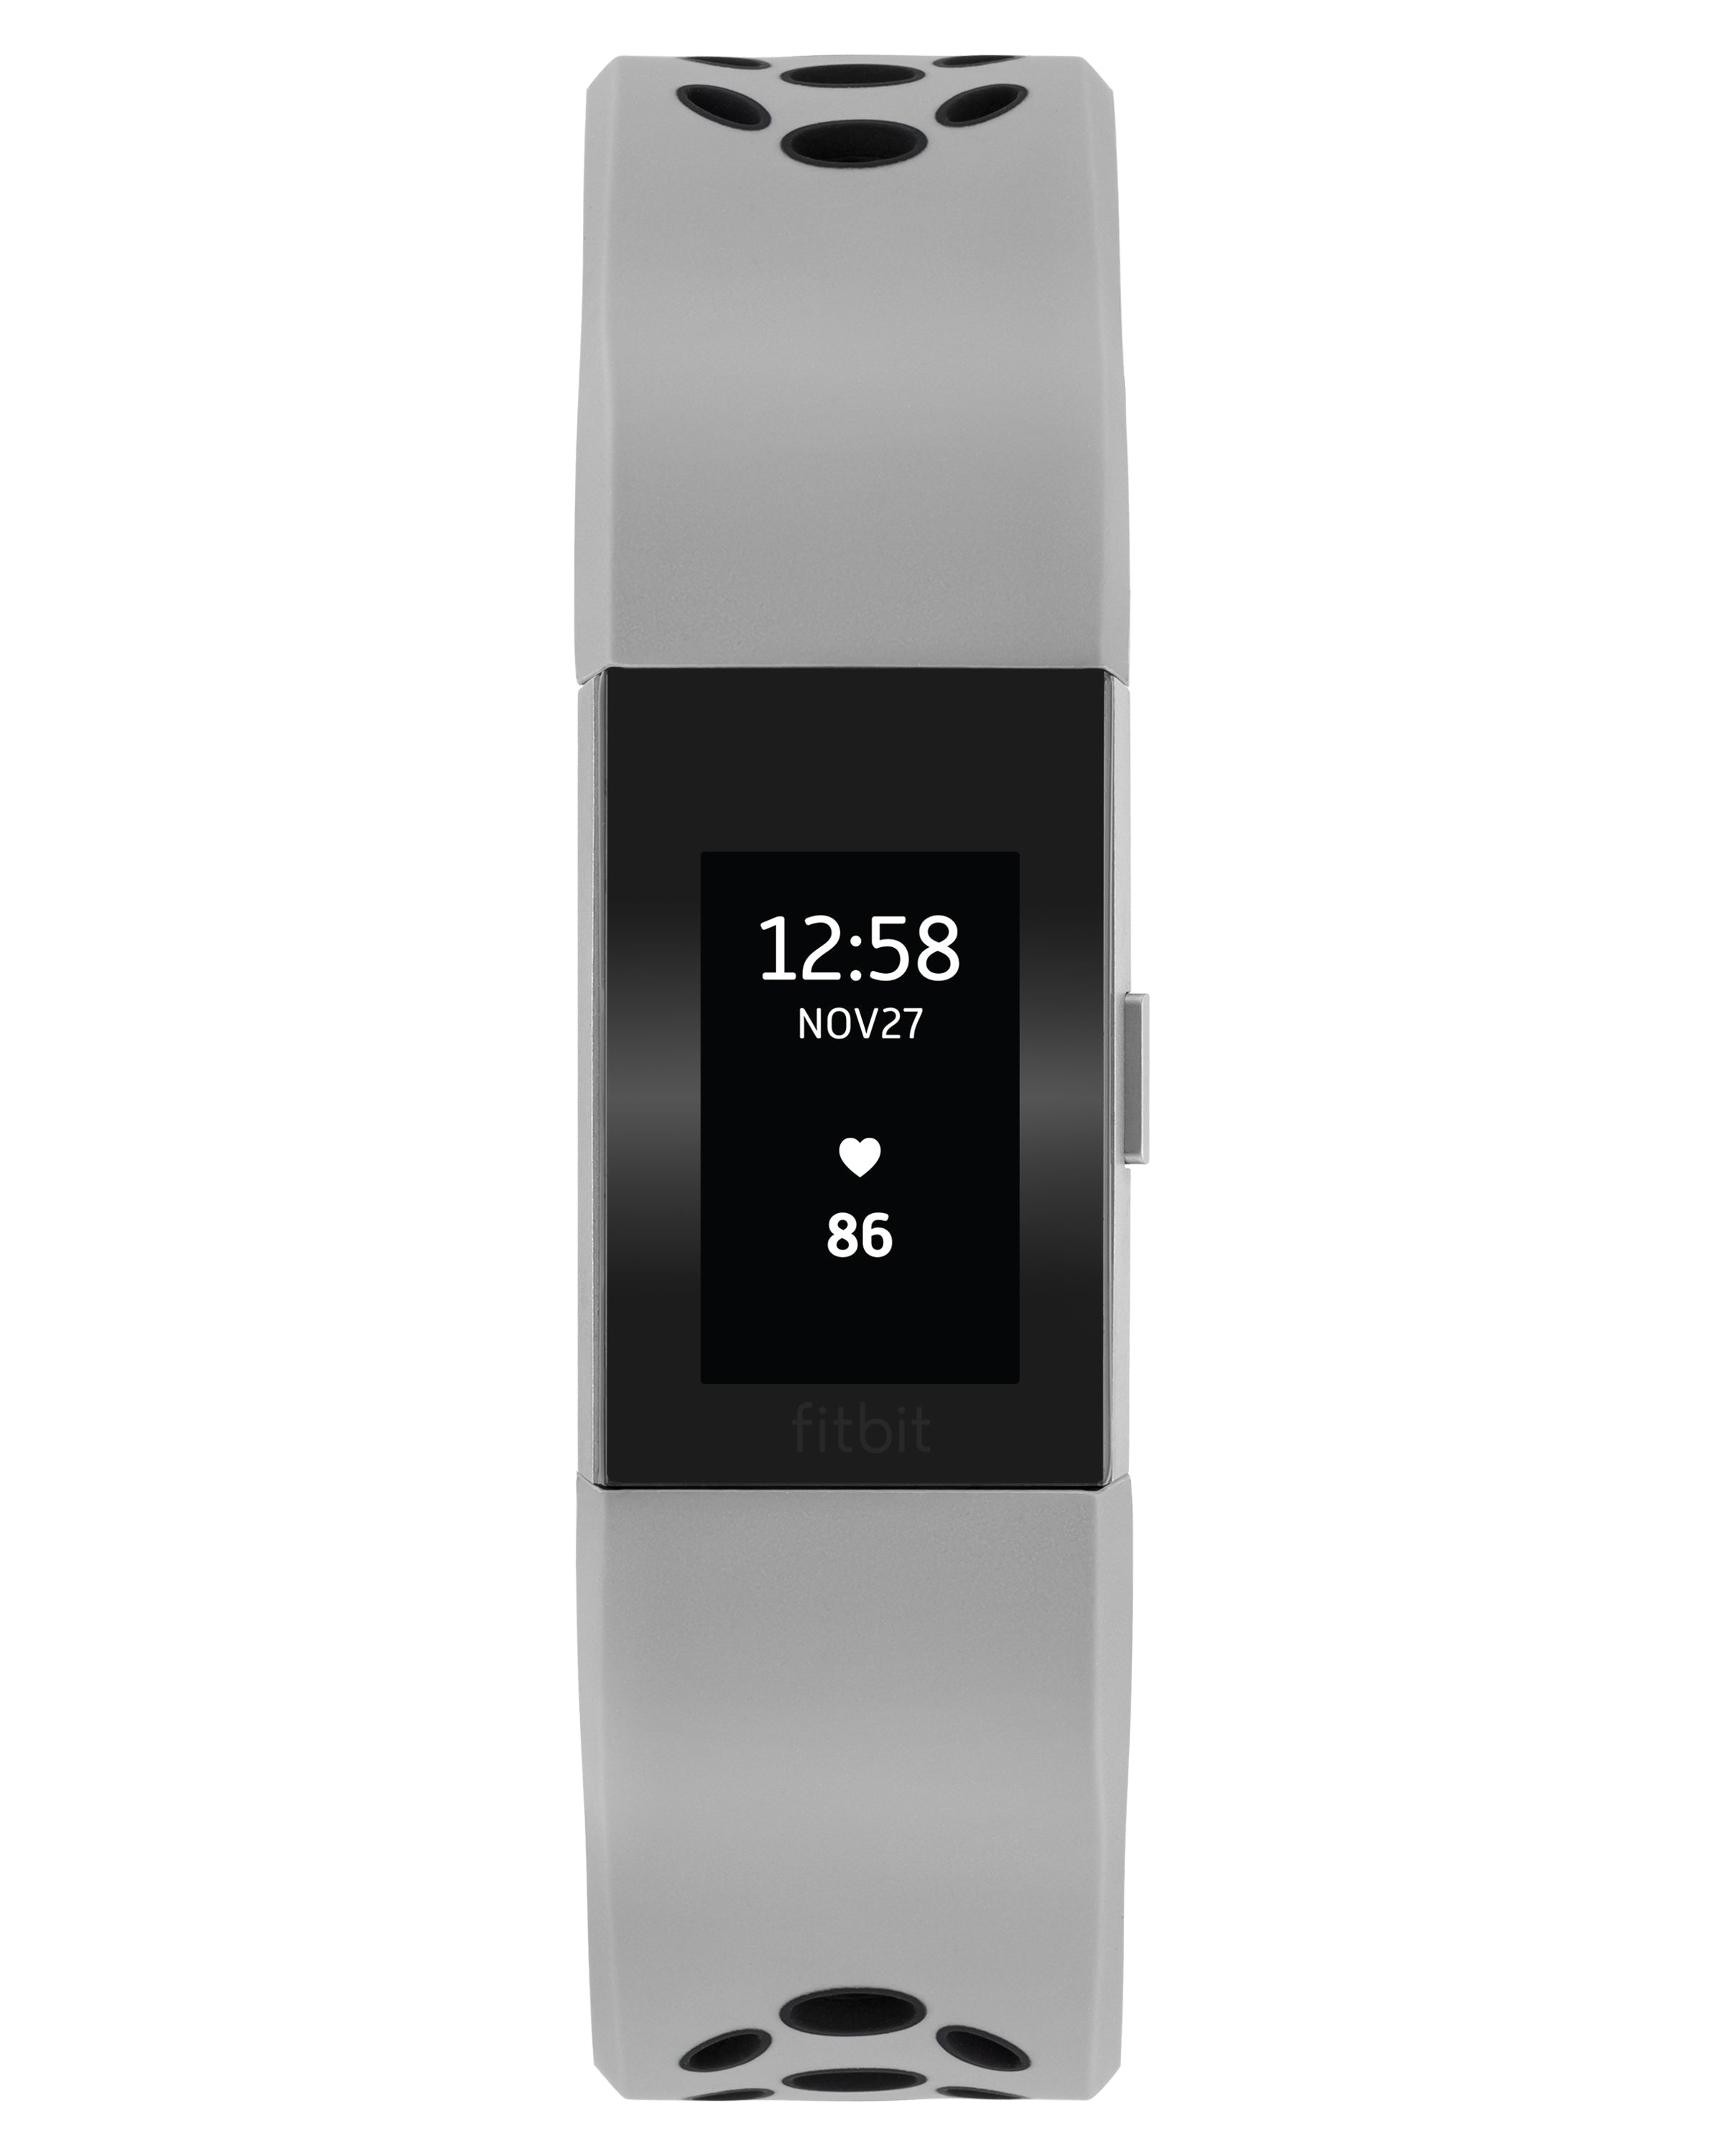 Silicone Sport Band for Fitbit Charge